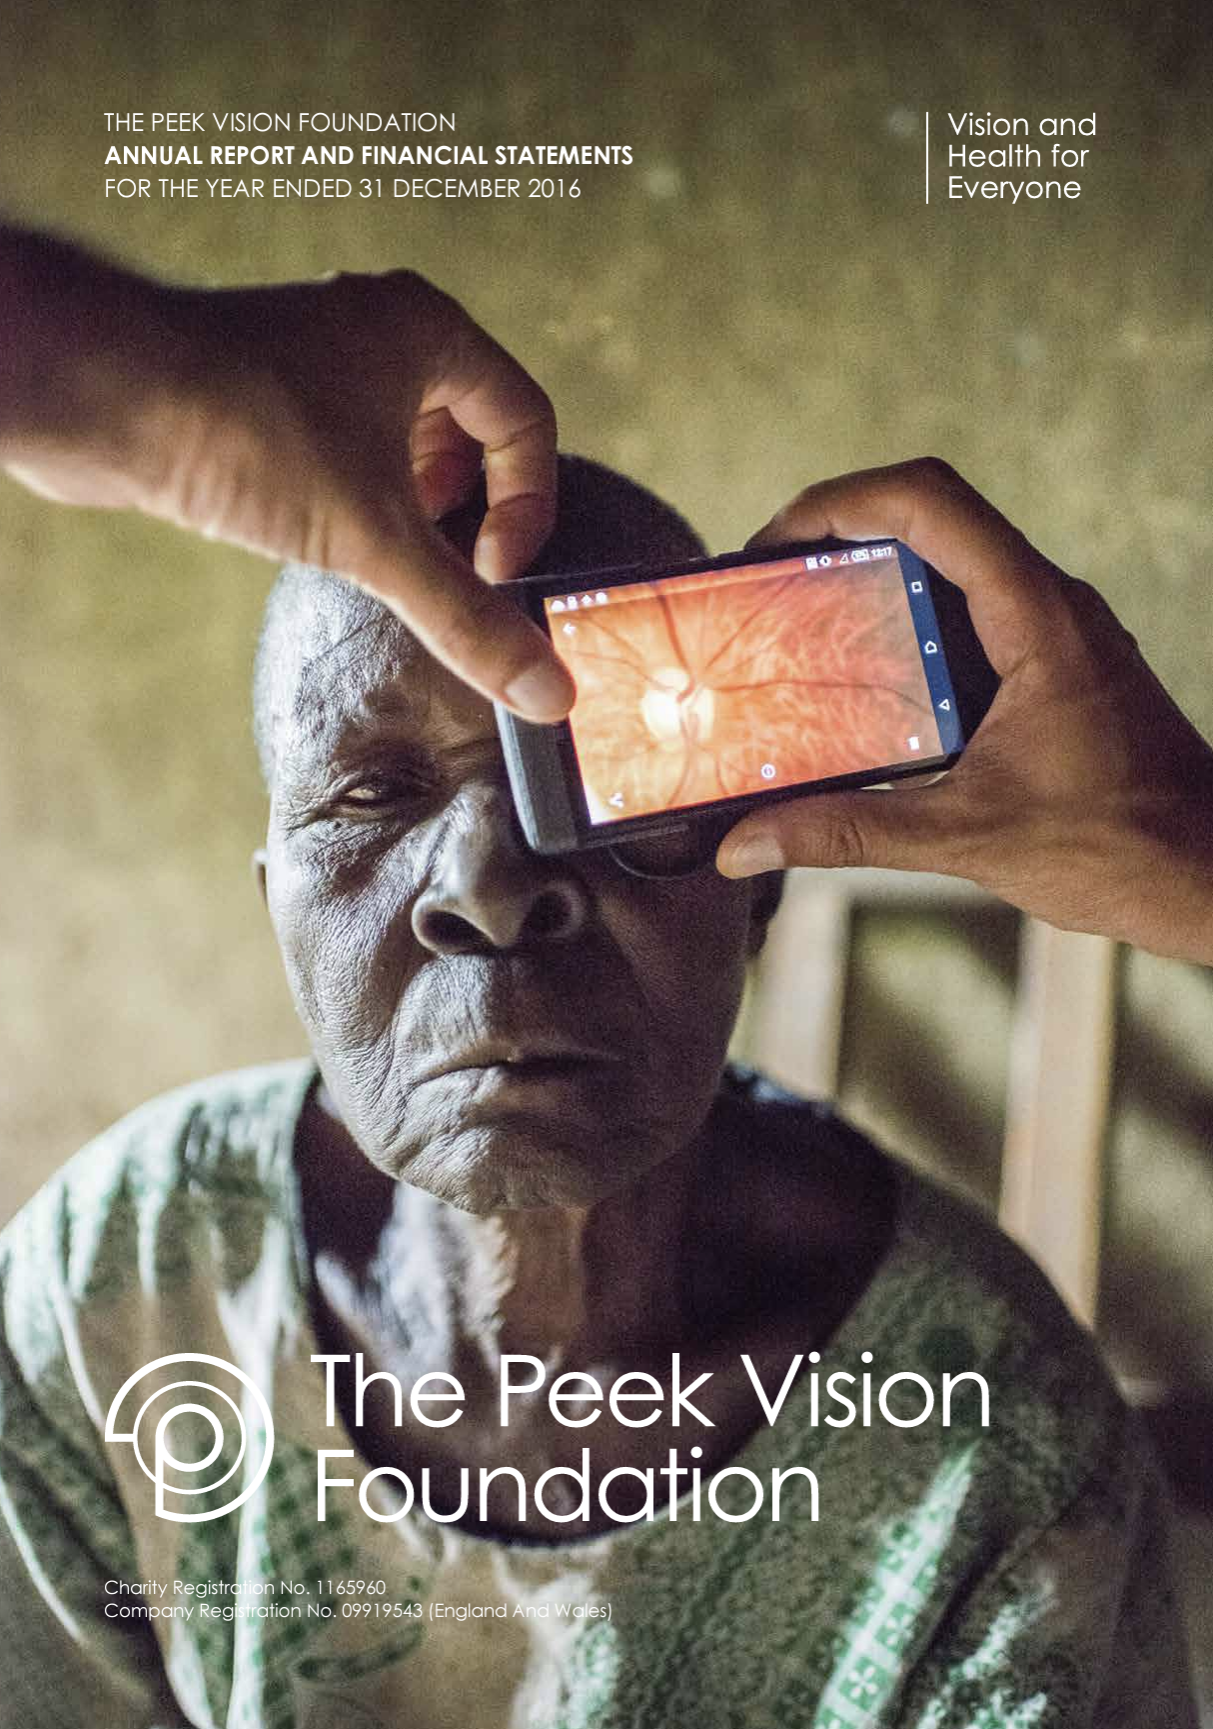 A hand holds a camera up to an elderly woman's face as she has her eyes tested using the (now discontinued) Peek Retina tool - a device which allows you to see the back of the eye. In front it reads The Peek Vision Foundation, Annual Report 2016.